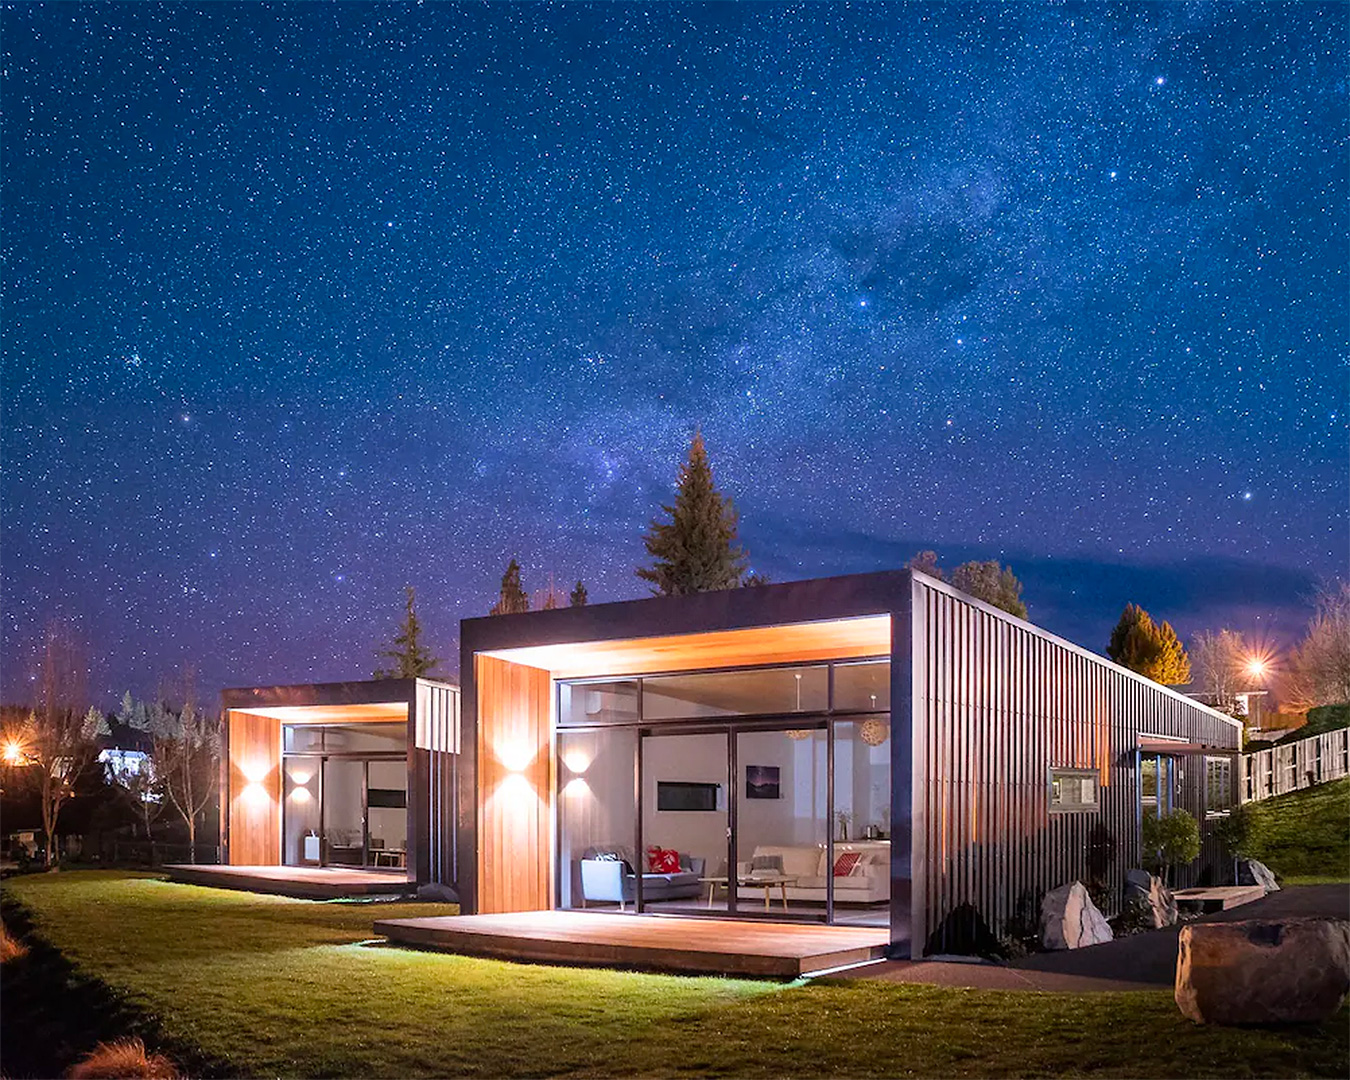 Two modern villas and an incredible night sky filled with stars.  